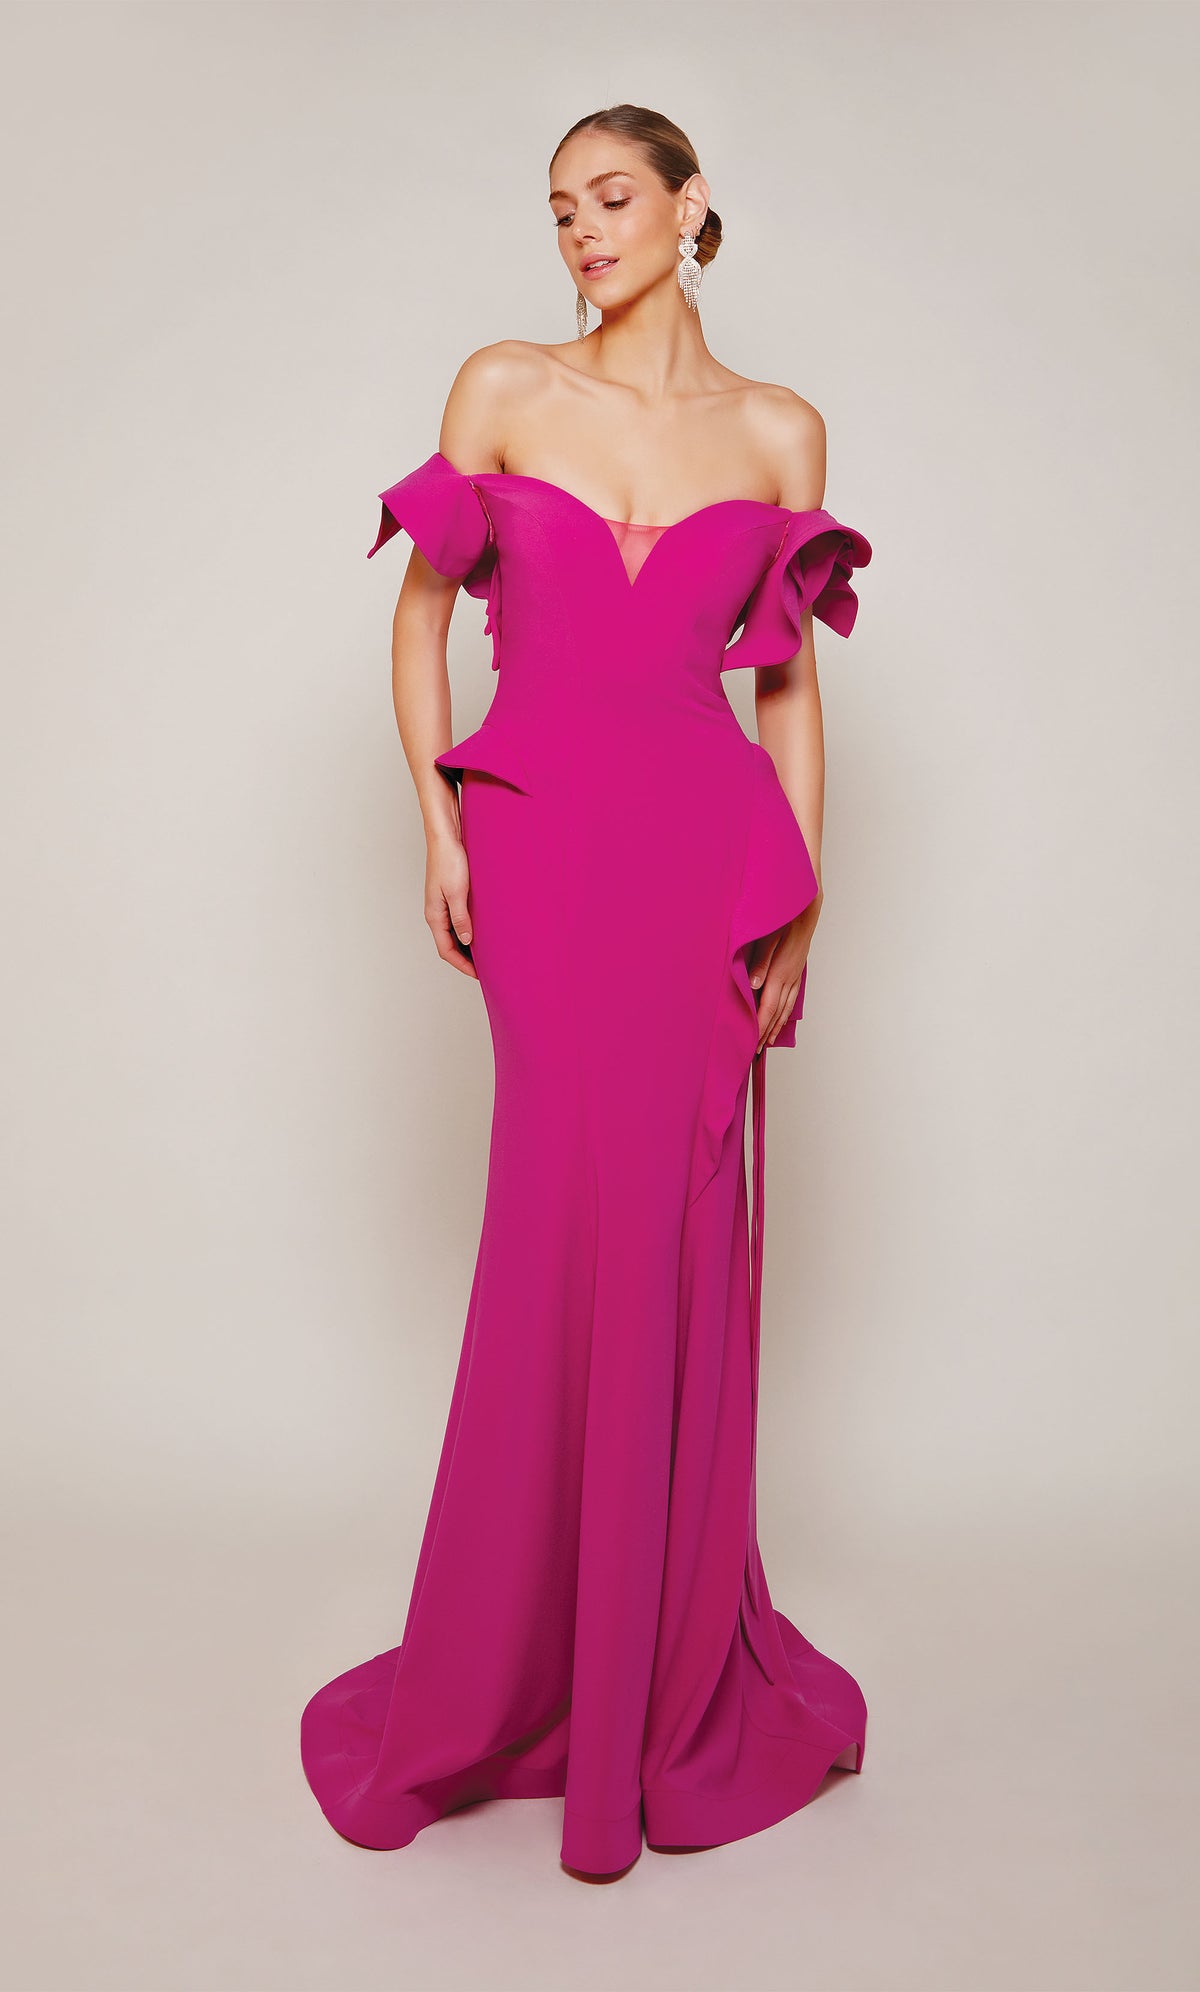 A chic, raspberry pink wedding guest dress boasting an off-the-shoulder neckline, rosette sleeves, and a sheath skirt with cascading ruffles. An excellent choice for a formal evening wedding.